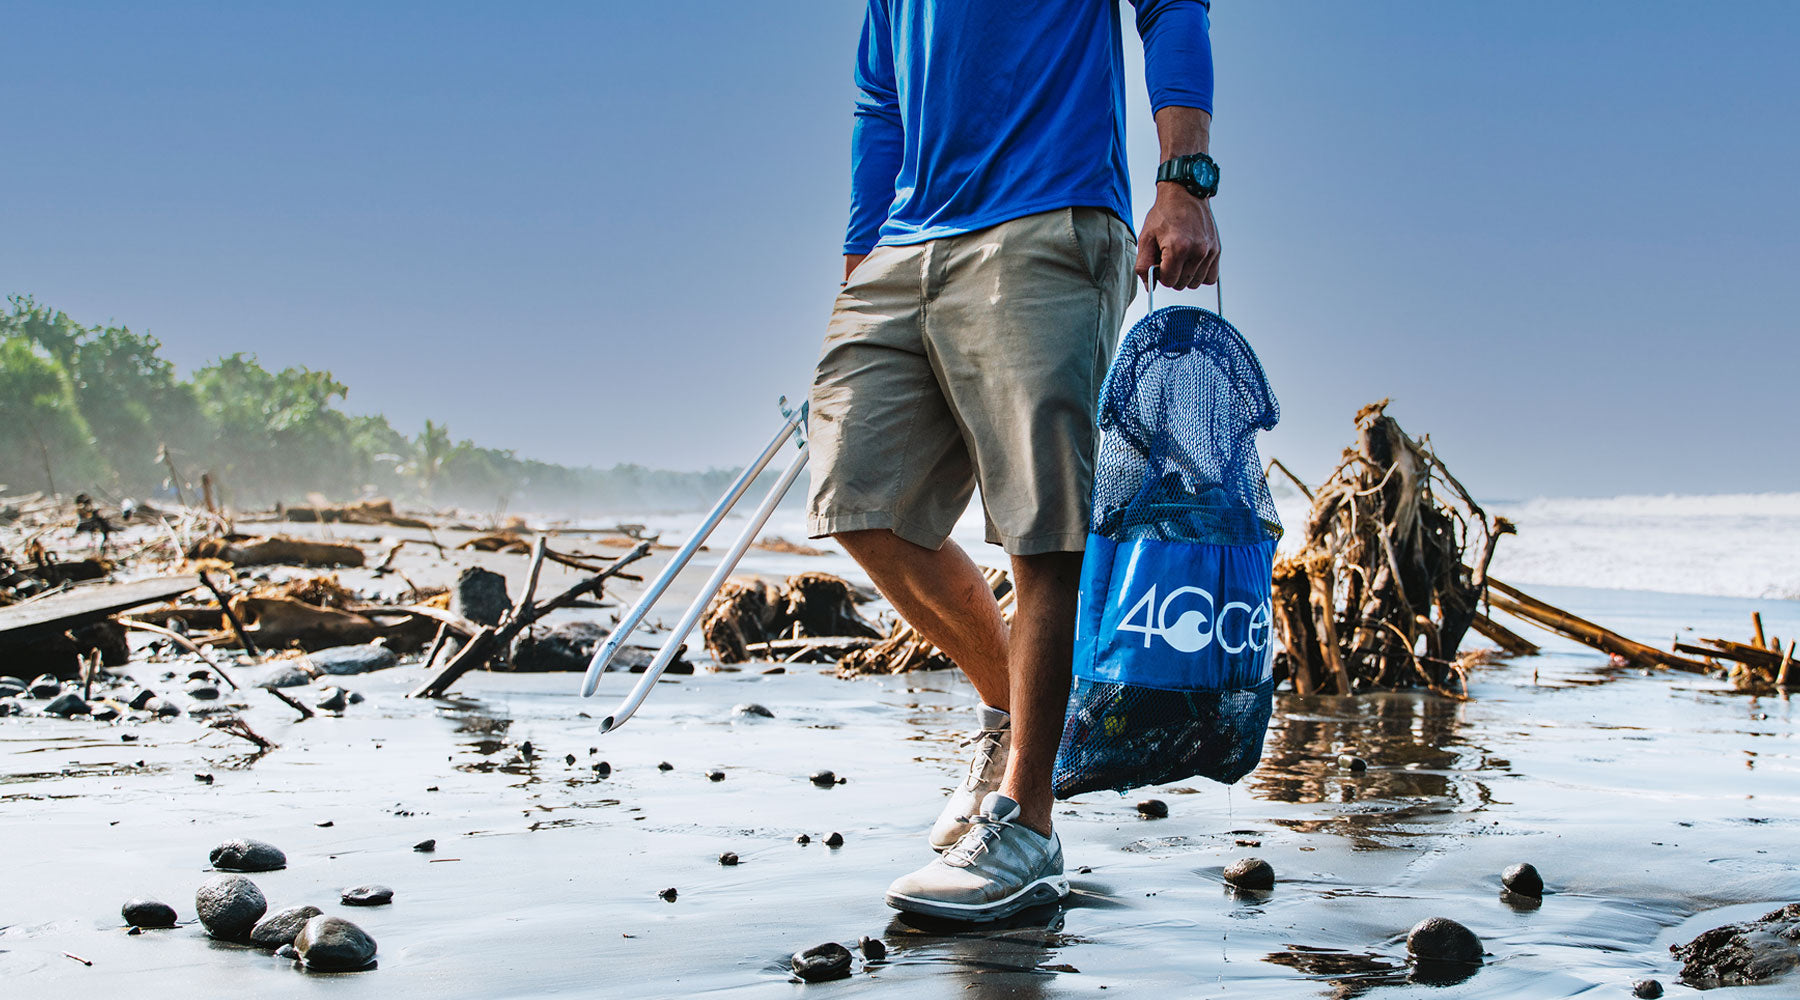 How to Organize a Community Beach Cleanup - 4ocean